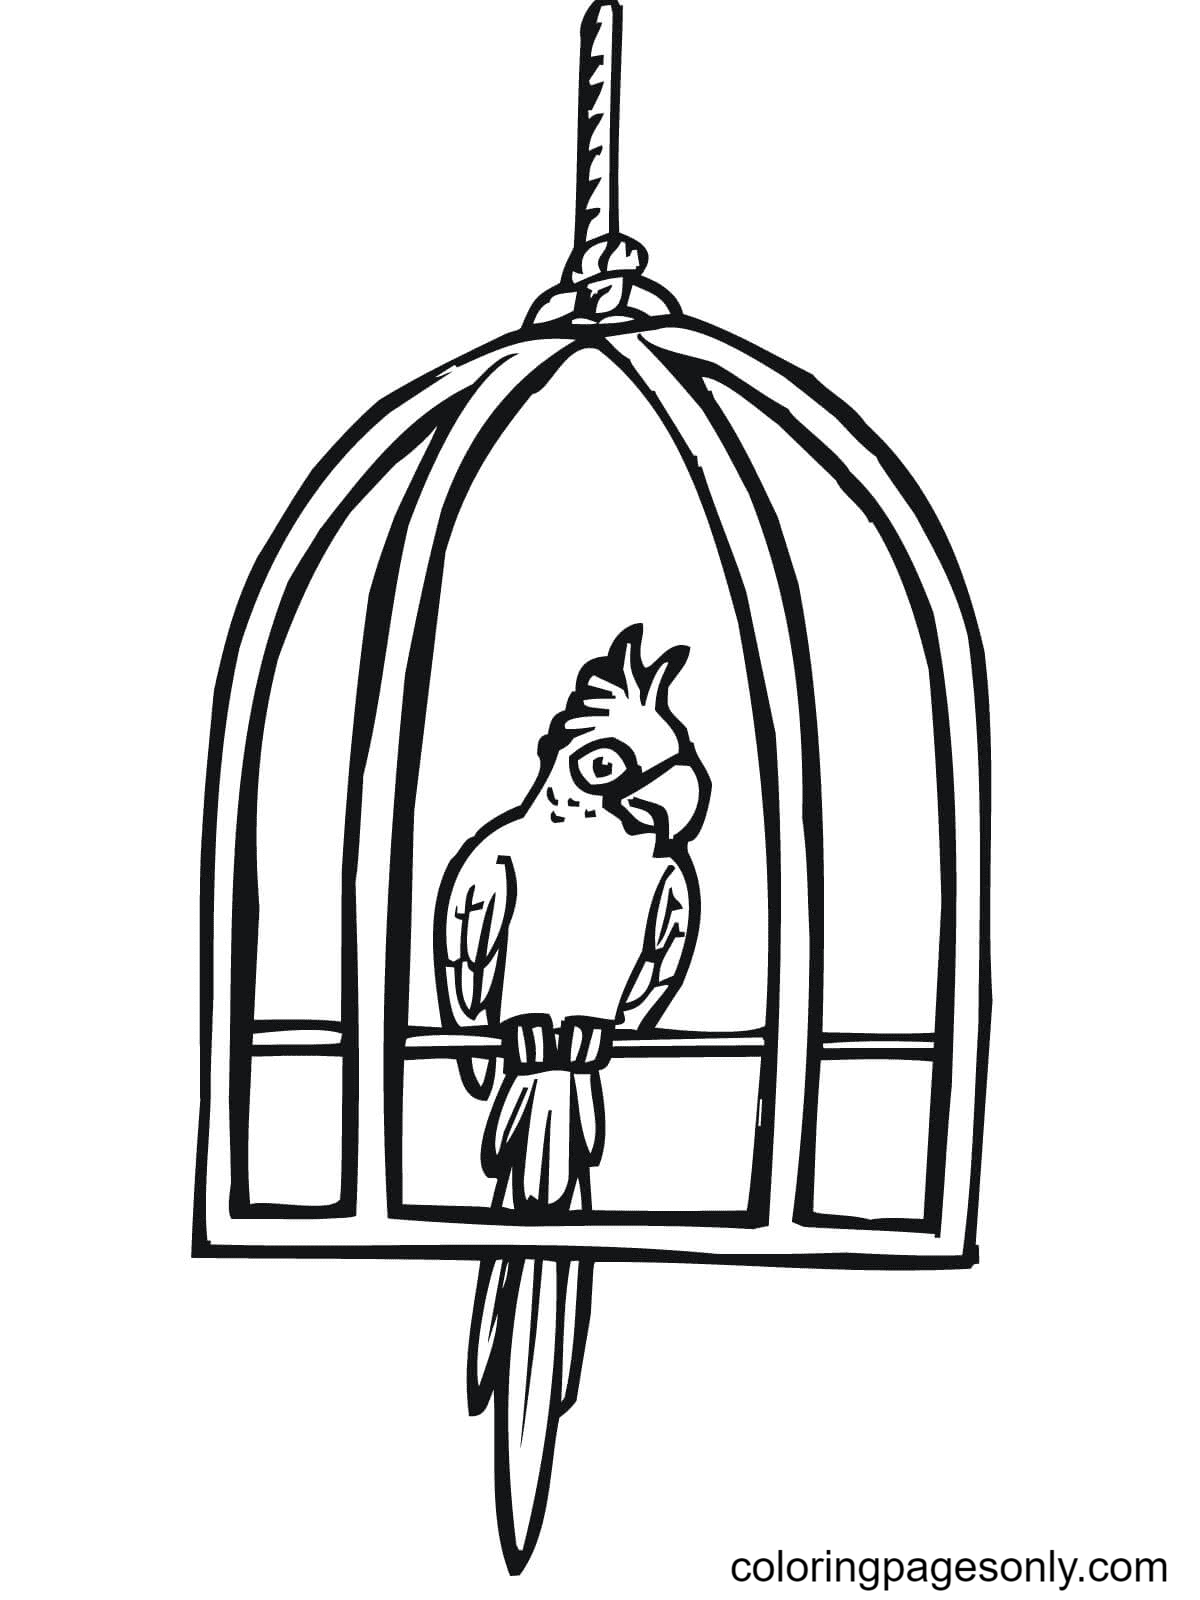 Parrot In A Cage Coloring Pages